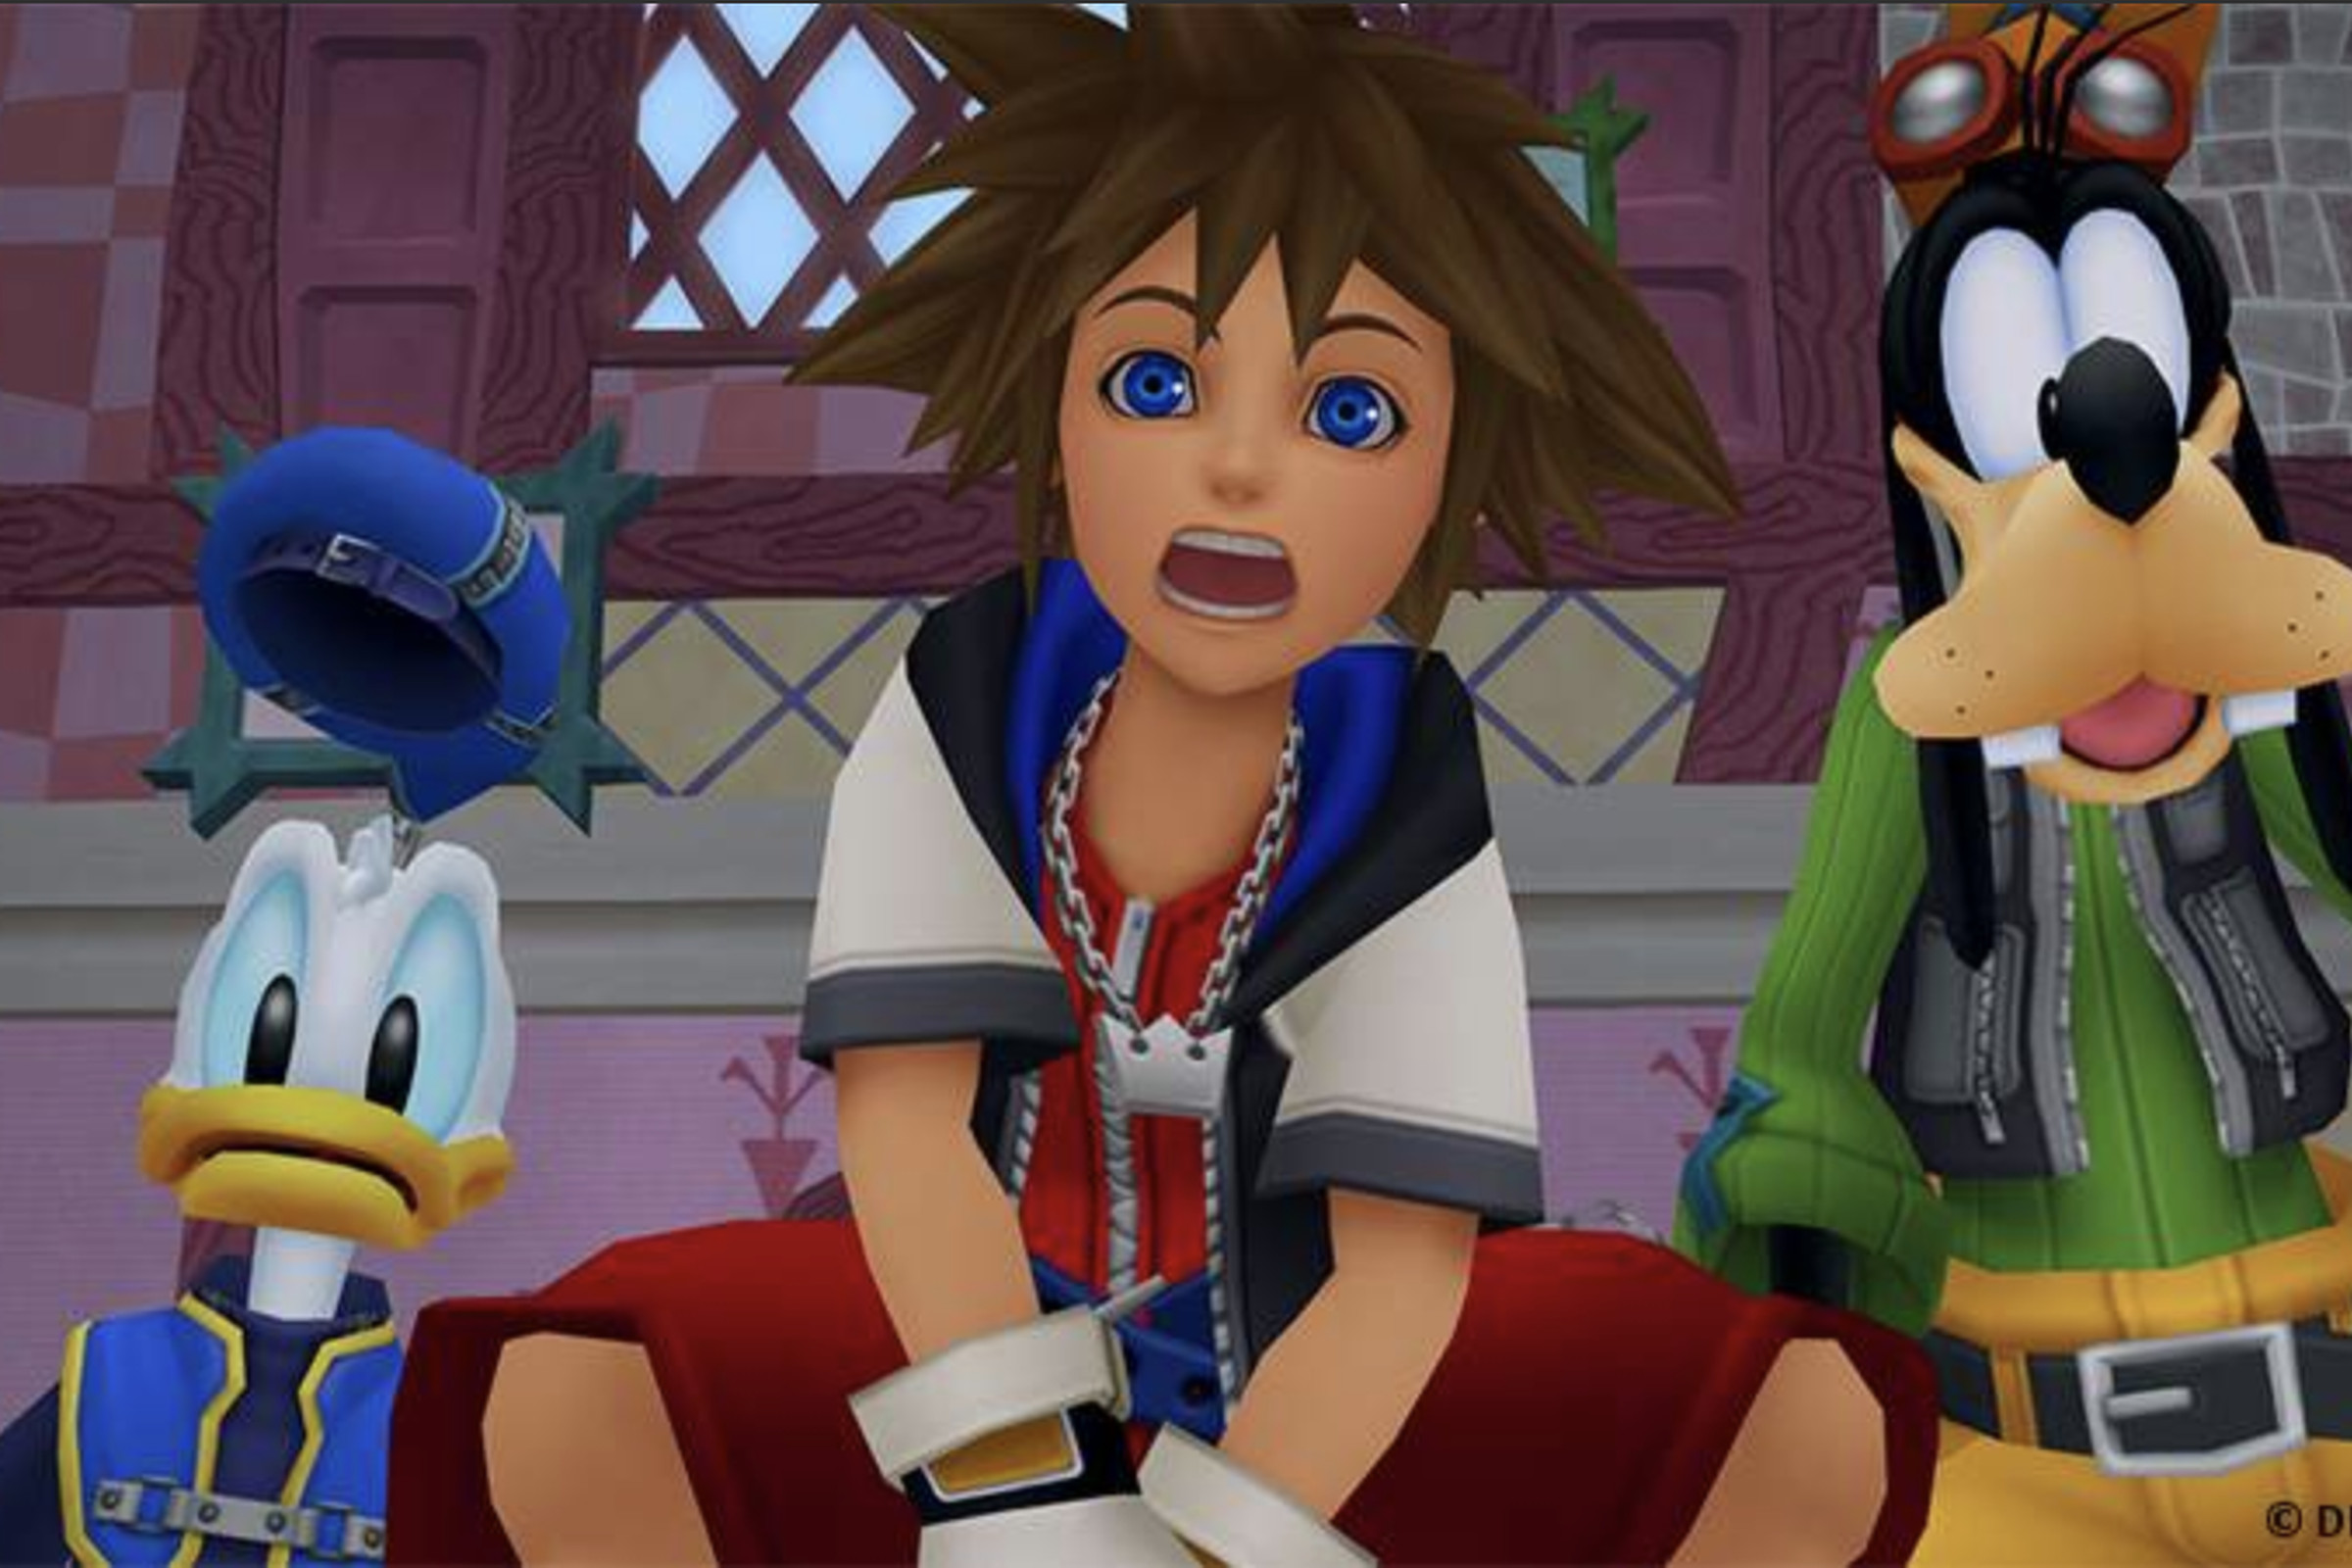 Screenshot from Kingdom Hearts featuring Donald, Sora, and Goofy in Wonderland.